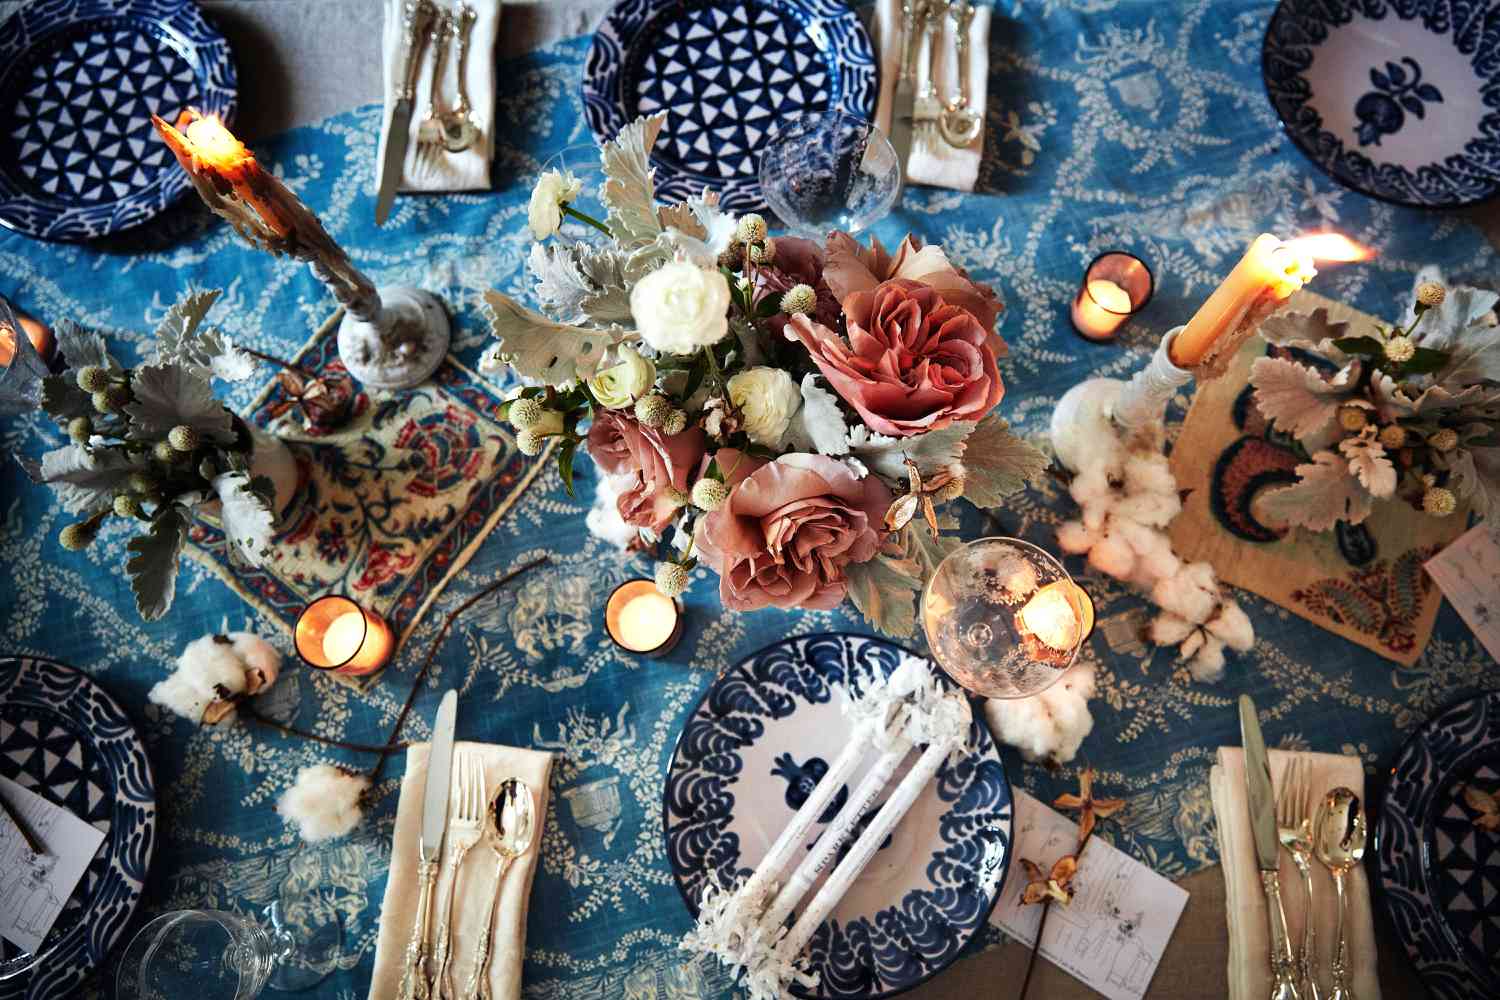 Rebecca Taylor's holiday tablescape